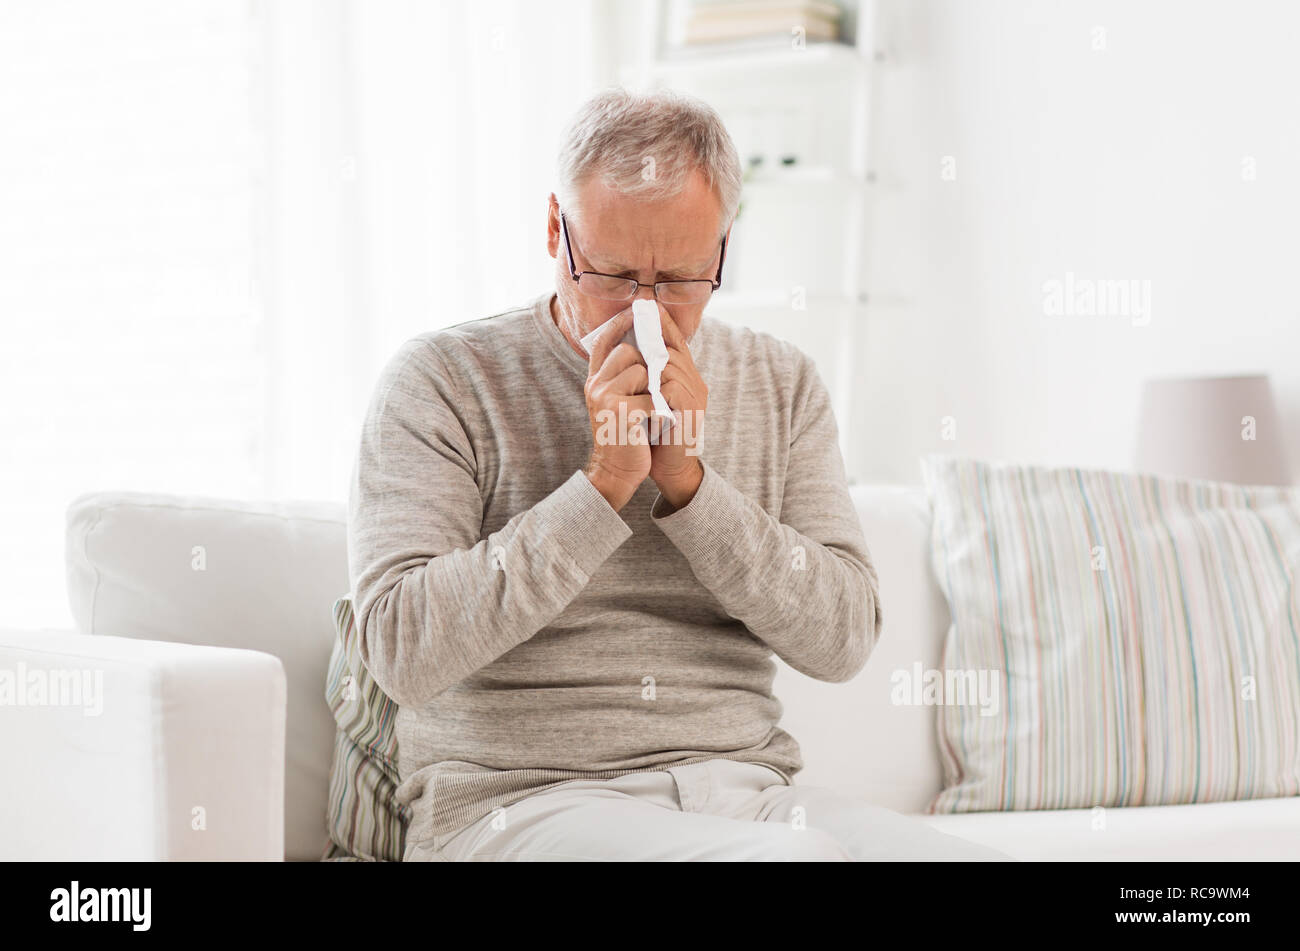 sick senior man with paper wipe blowing his nose Stock Photo